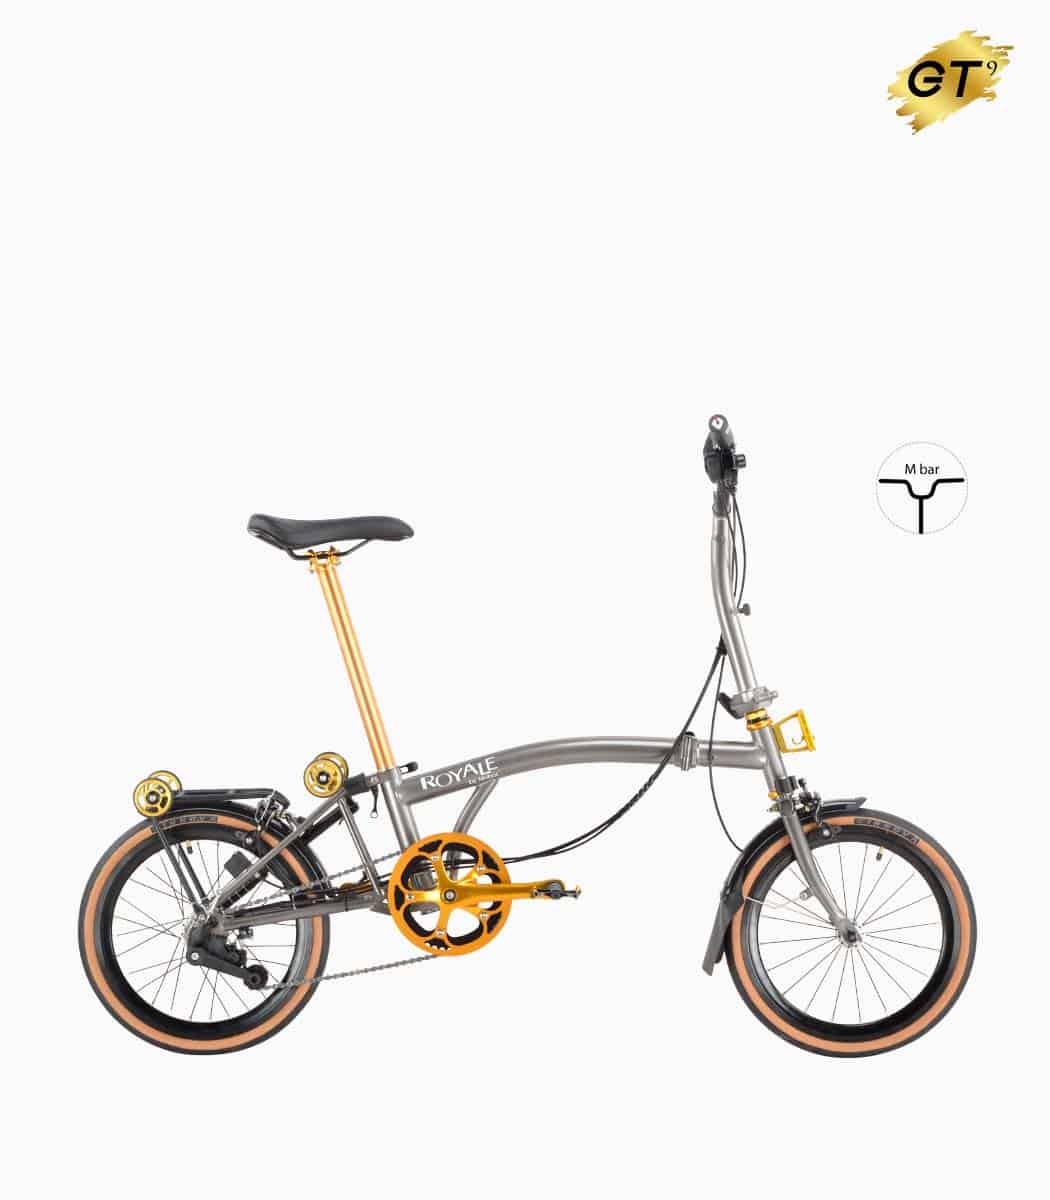 MOBOT ROYALE GT M9 (TITANIUM SILVER) foldable bicycle gold edition M-bar with tanwall tyres high profile rim right